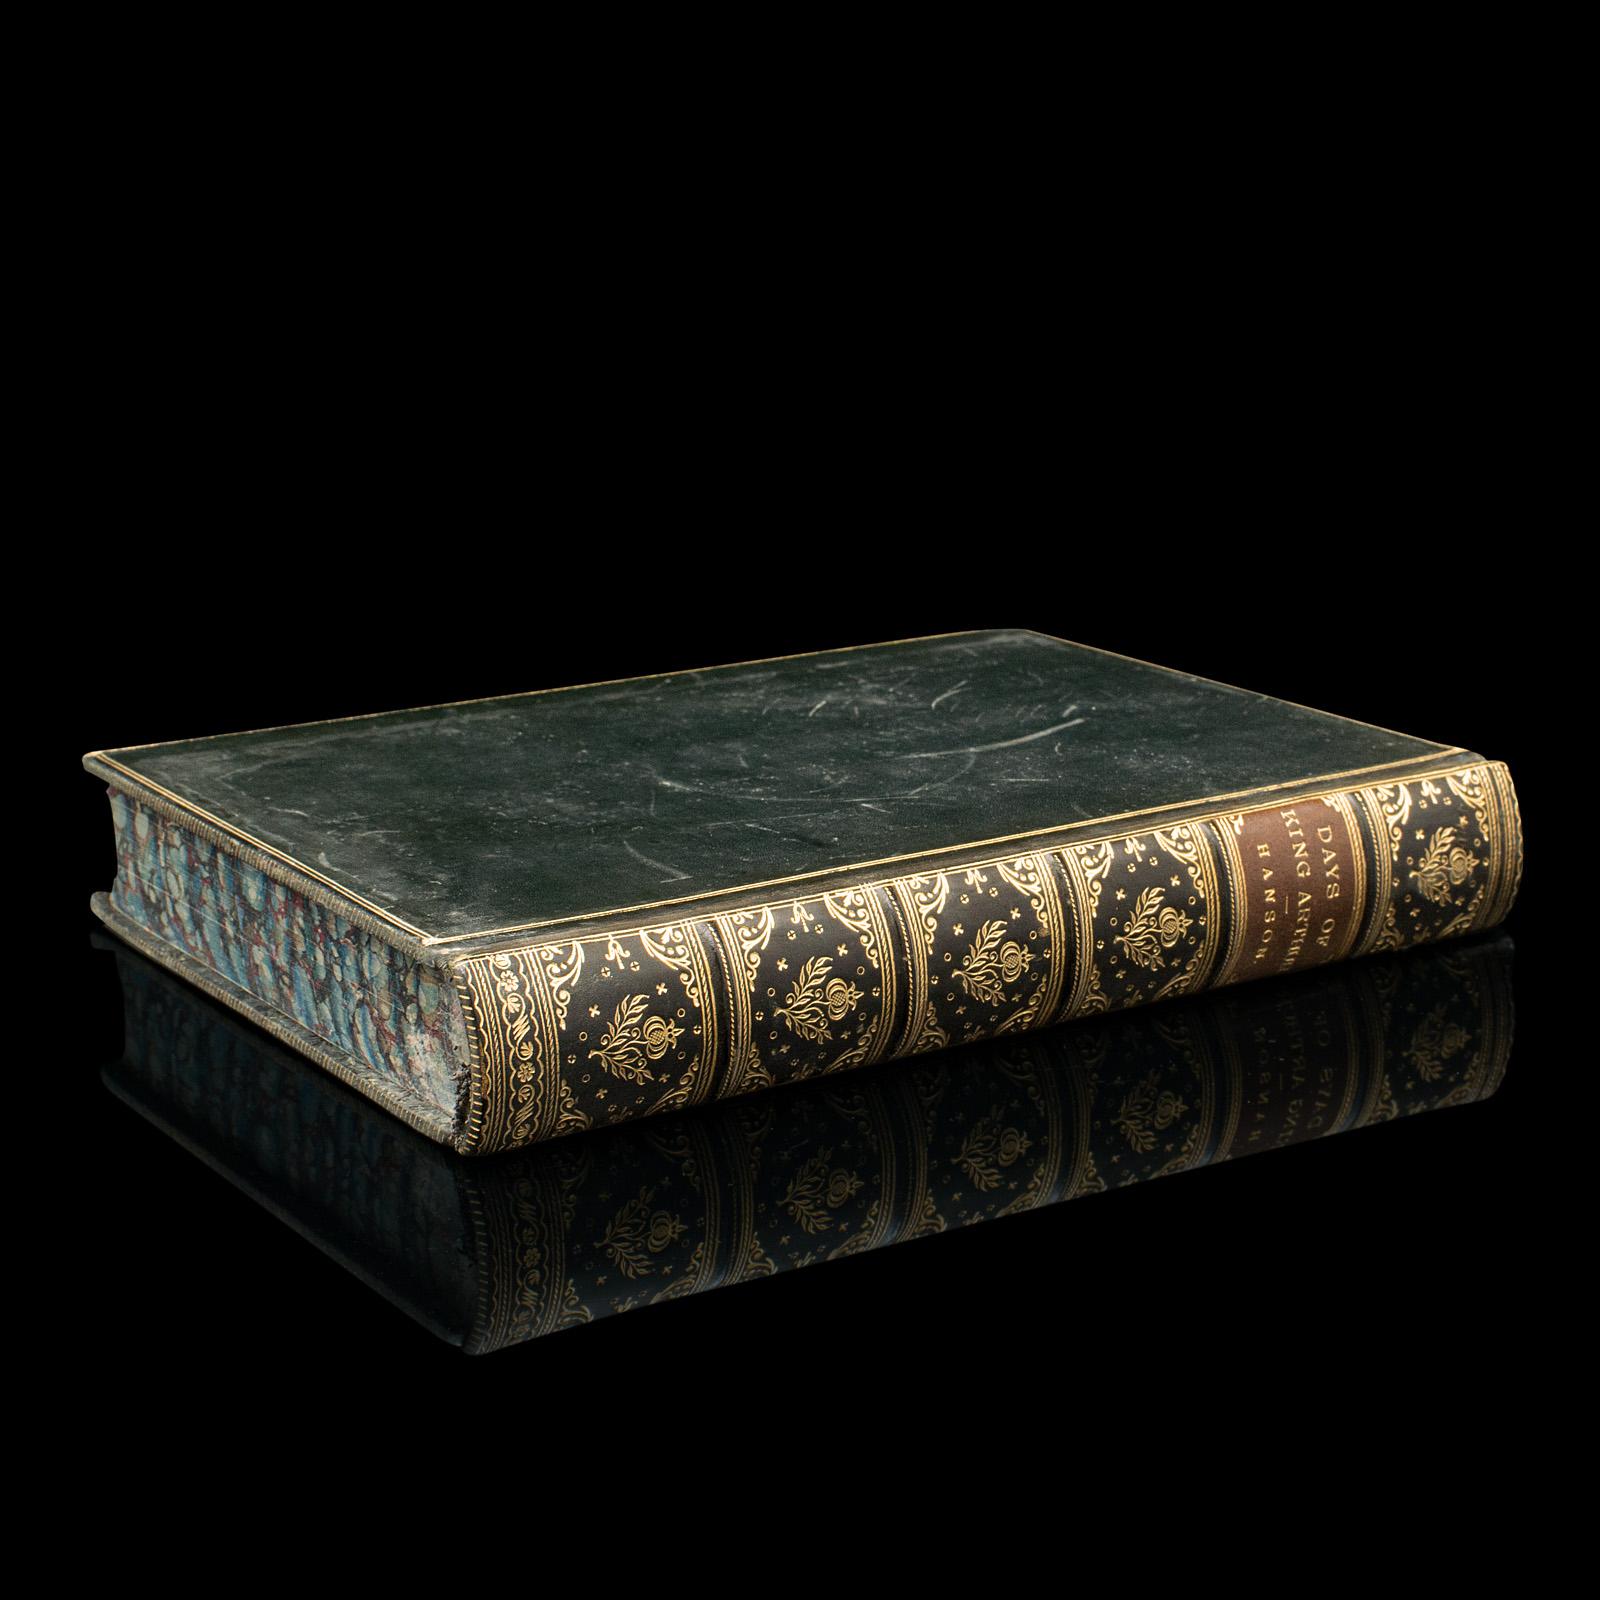 This is an antique mythology book, Days of King Arthur by Charles Henry Hanson. An English language, hard bound fictional work with illustrations by Gustave Doré, dating to the late Victorian period, published 1887.

Known for his retelling of